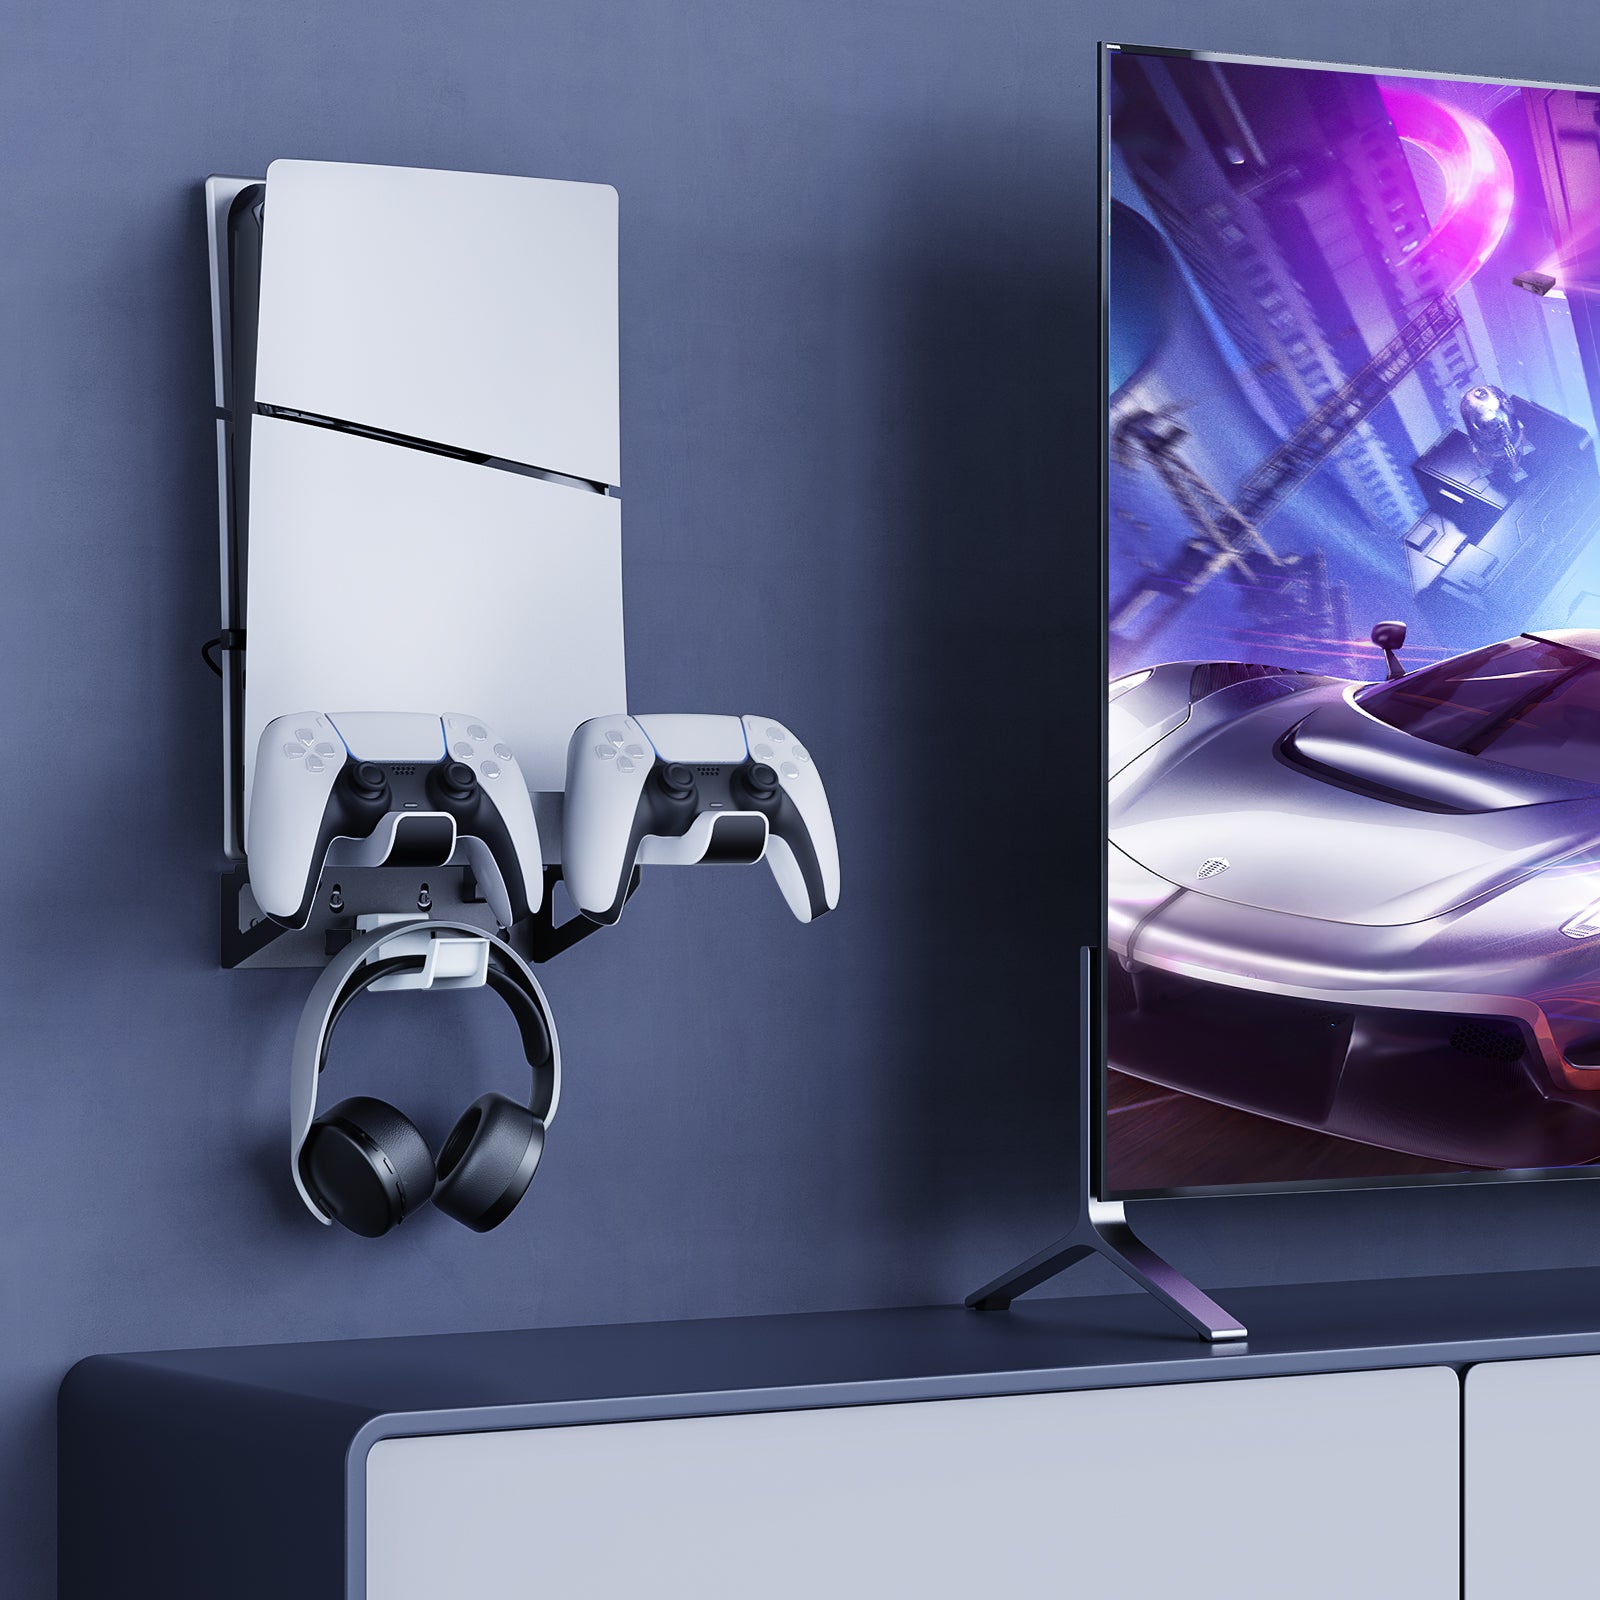 Scenes where our PS5 Slim Wall Mount Kit can be used.